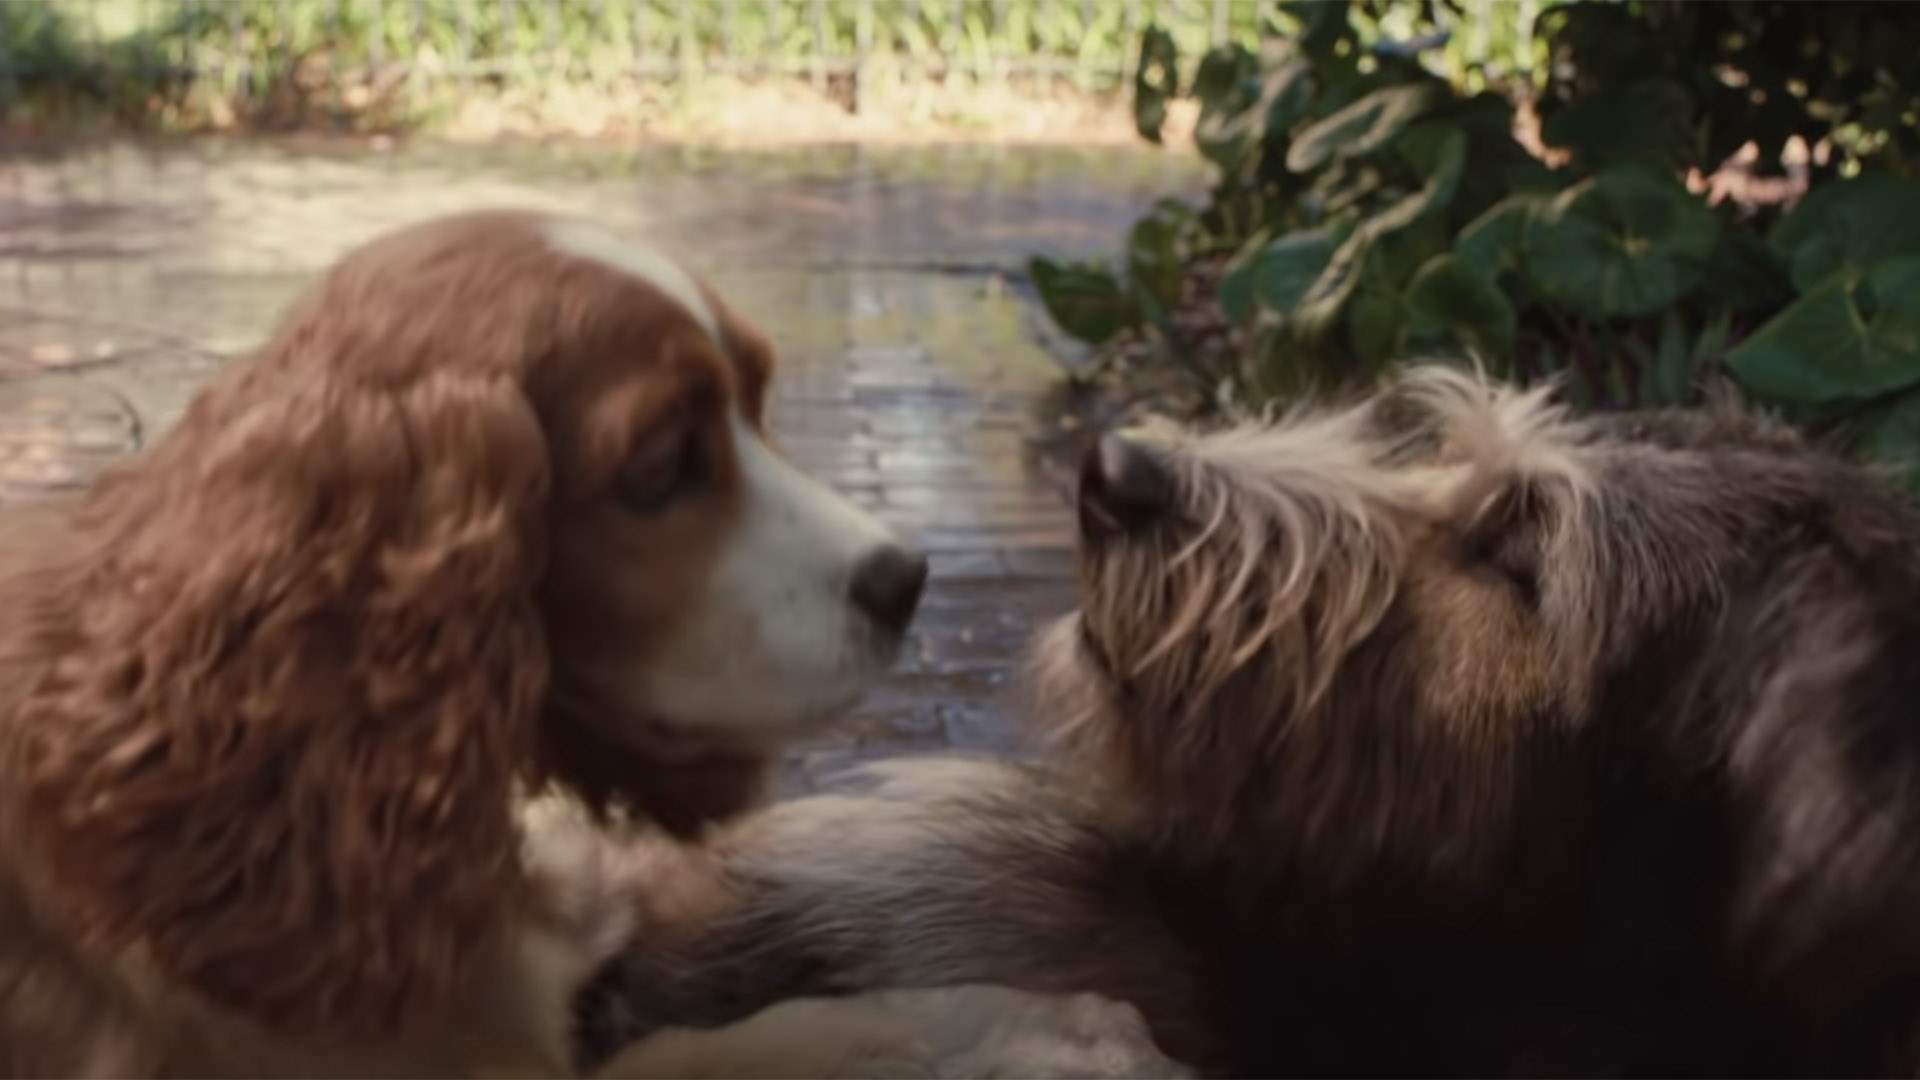 Disney's New Live-Action 'Lady and the Tramp' Trailer Is Here With Even More Adorable Dogs